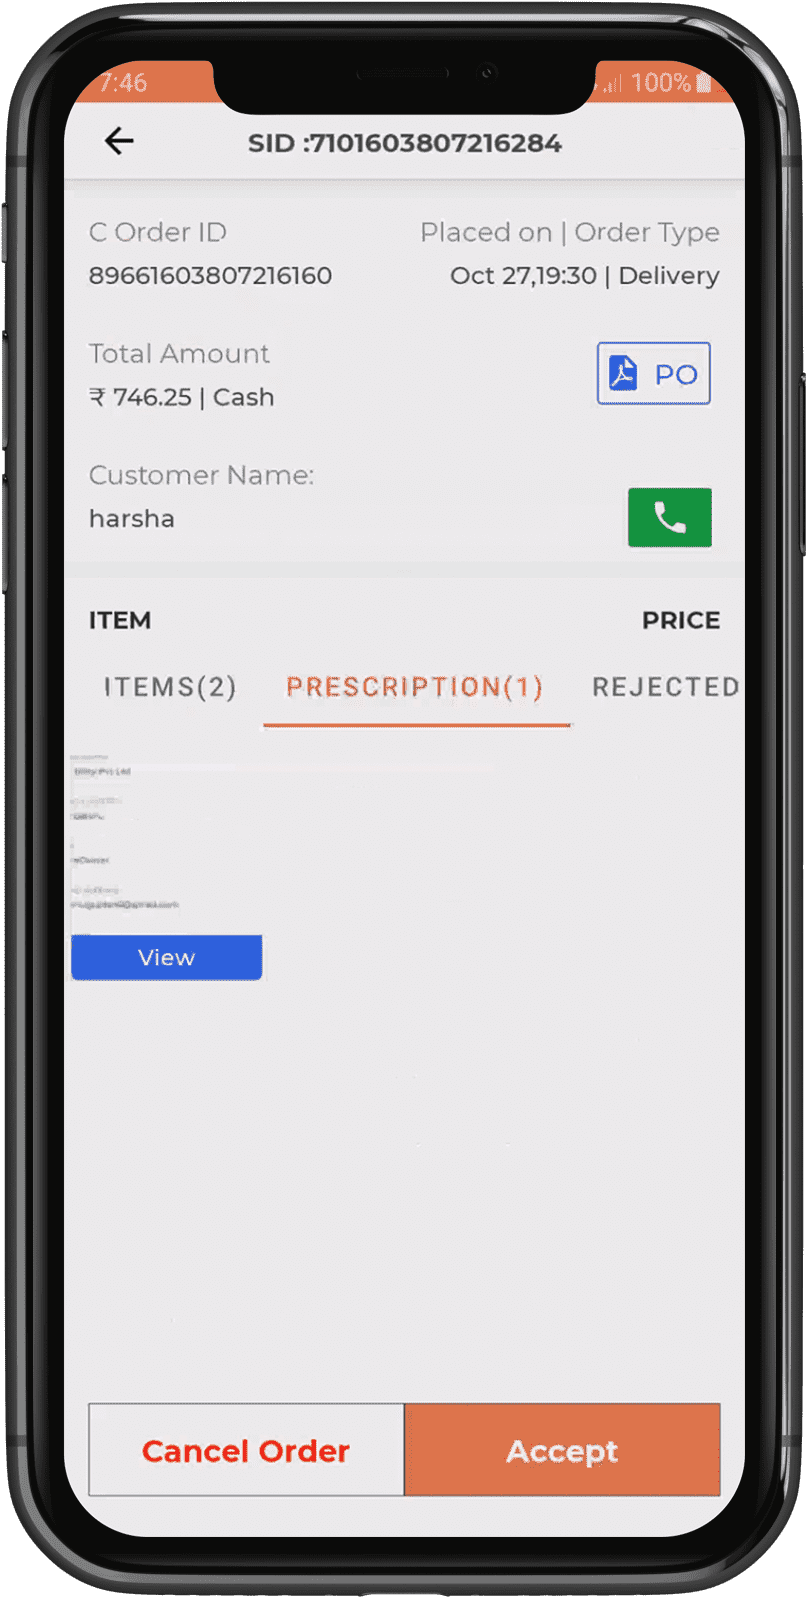 option-to-accept-or-reject-order-in-medicine-delivery-picker-app.png